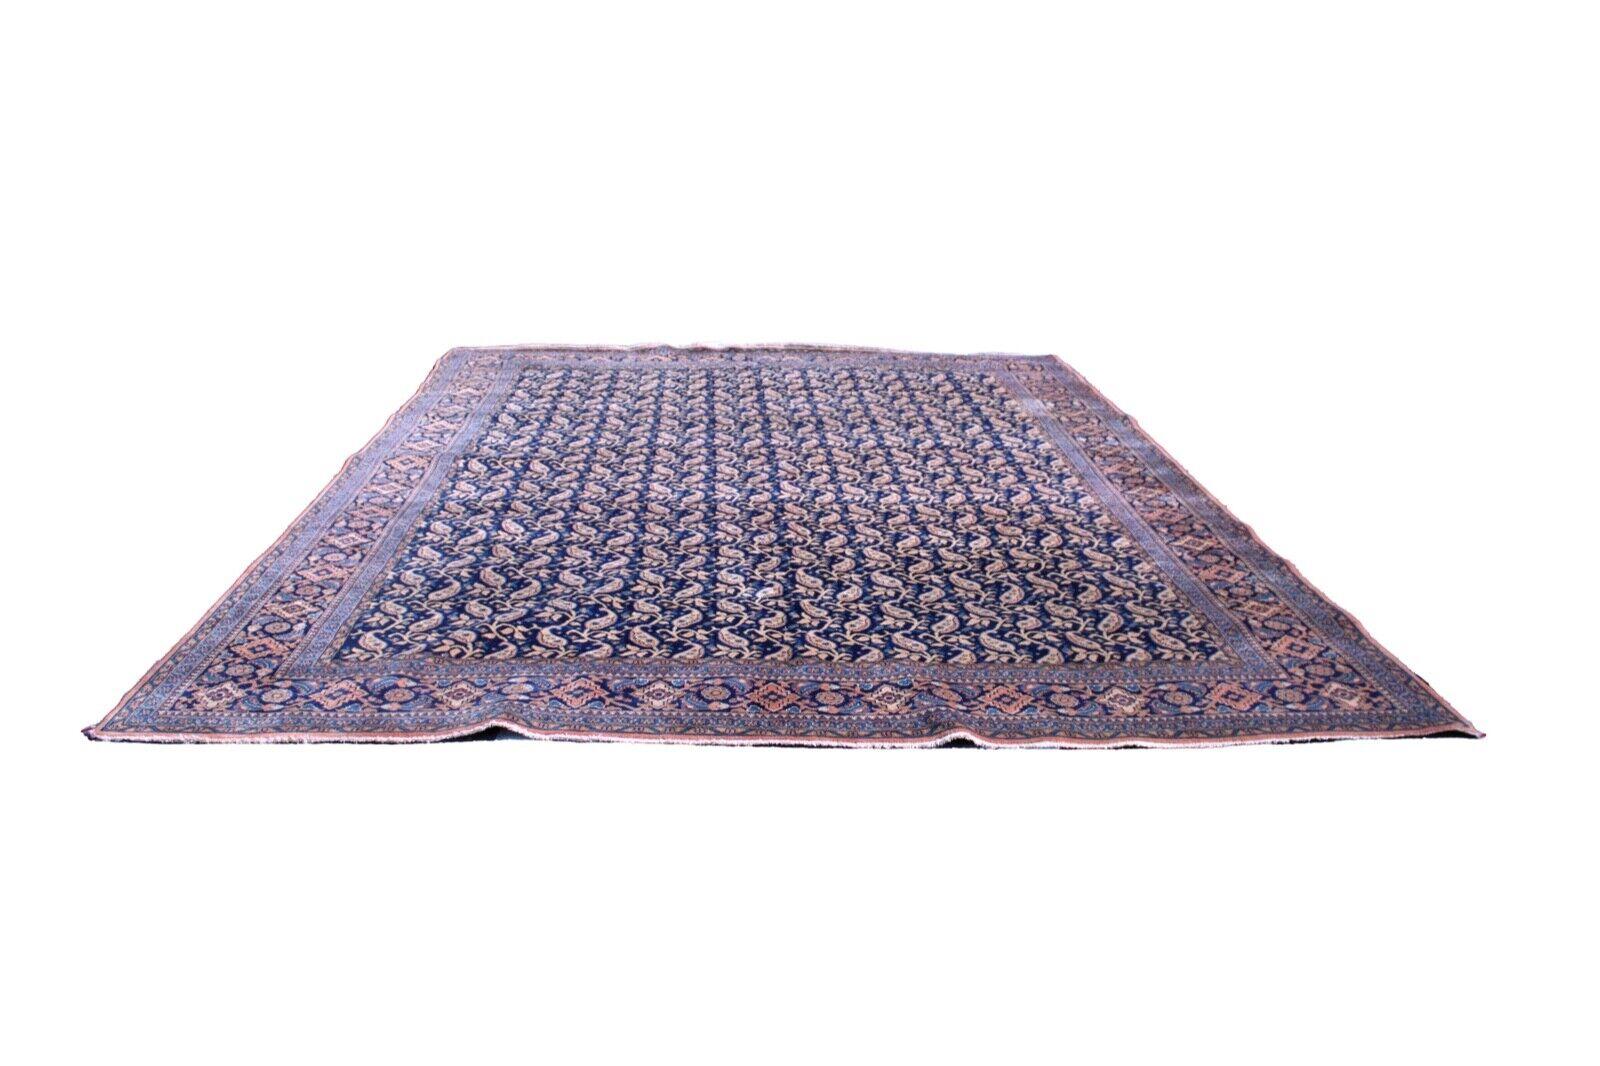 This beautiful Persian rug is hand-knotted. It is made from 100% hand-spun wool and natural dyes. The colors on the rug are vibrant, and the intricate pattern is unique to the region it was made. The rug has a soft, plush pile that is perfect for